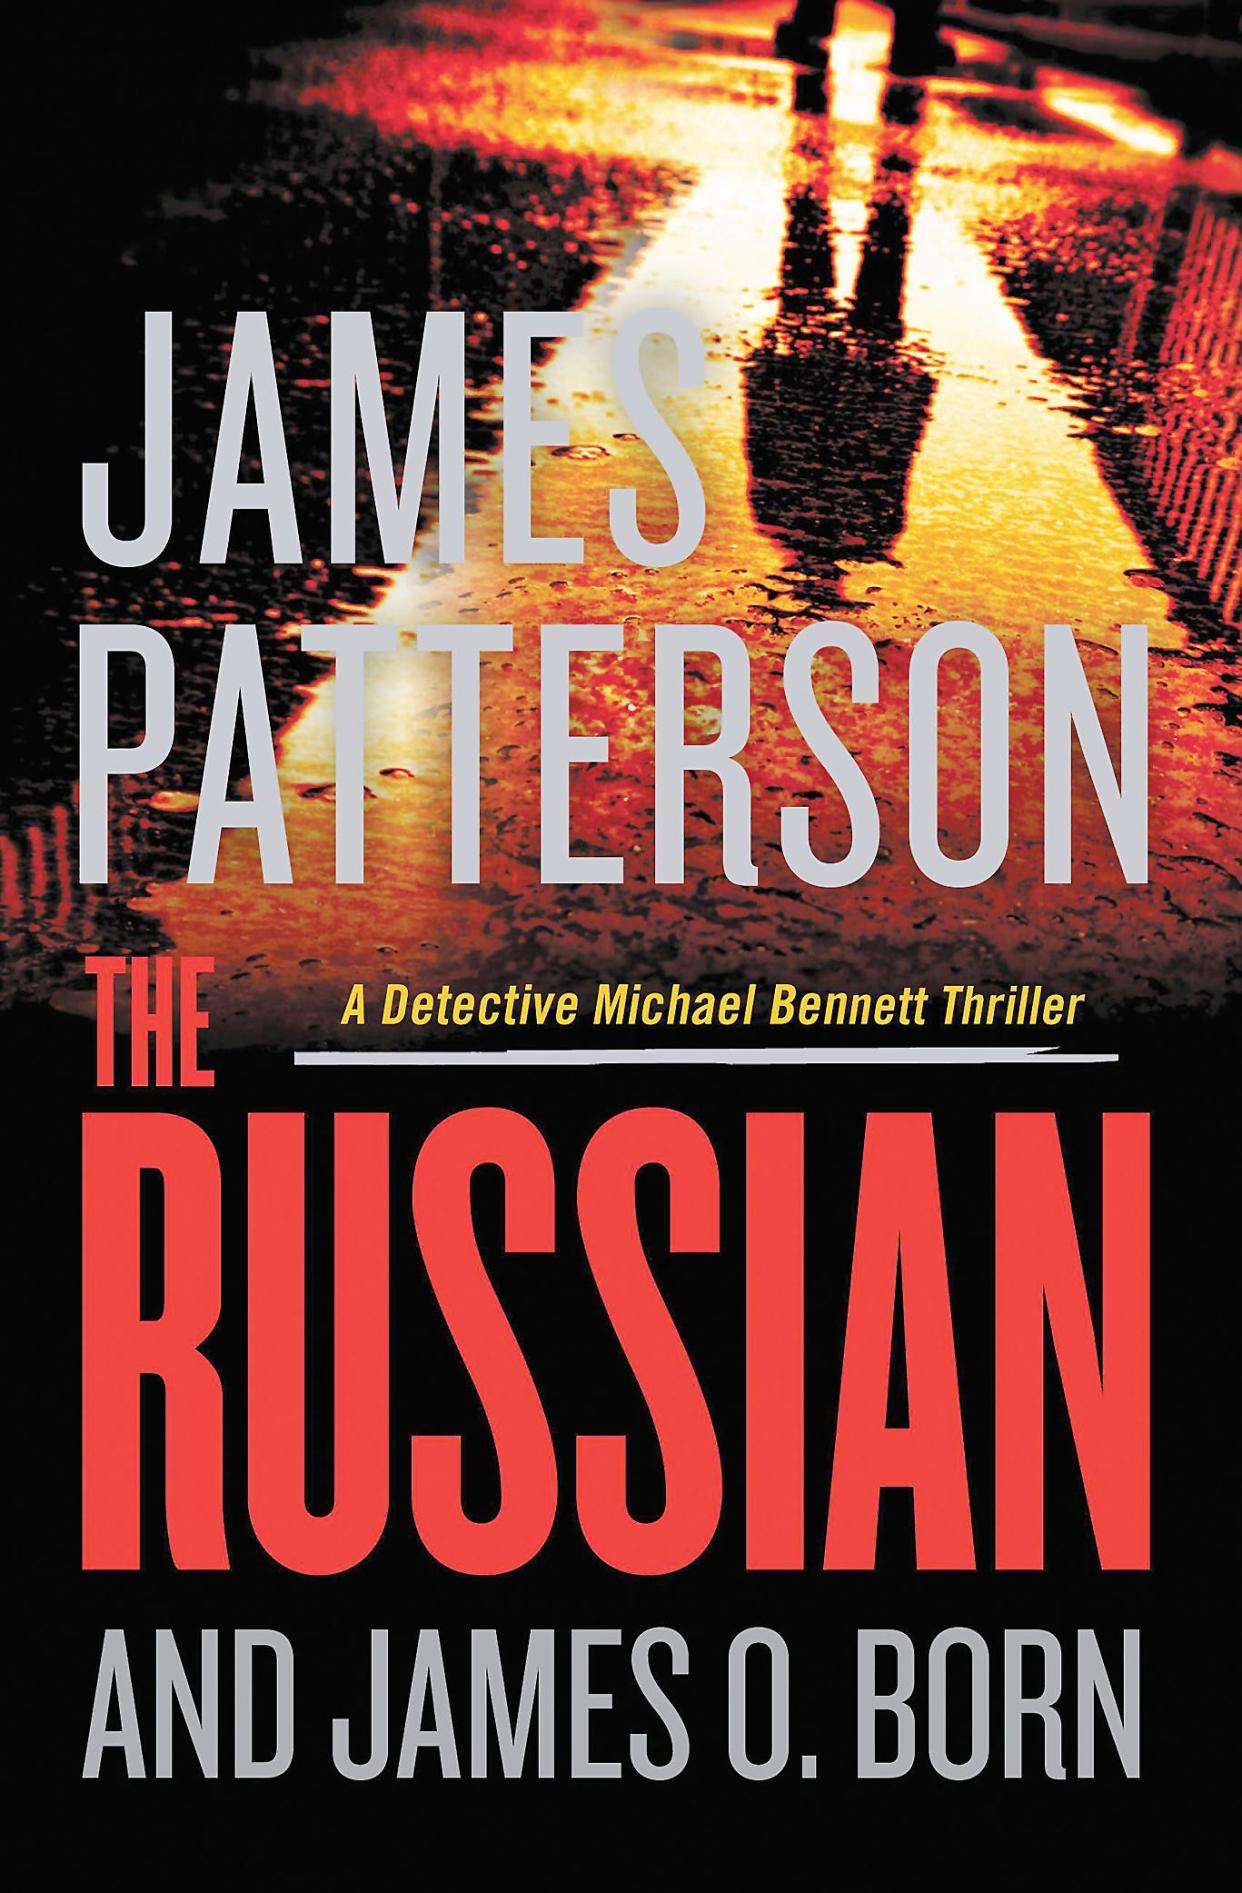 "The Russian," by James Patterson and James O. Born, was the Gadsden Public Library's most checked out book by adults in 2021.